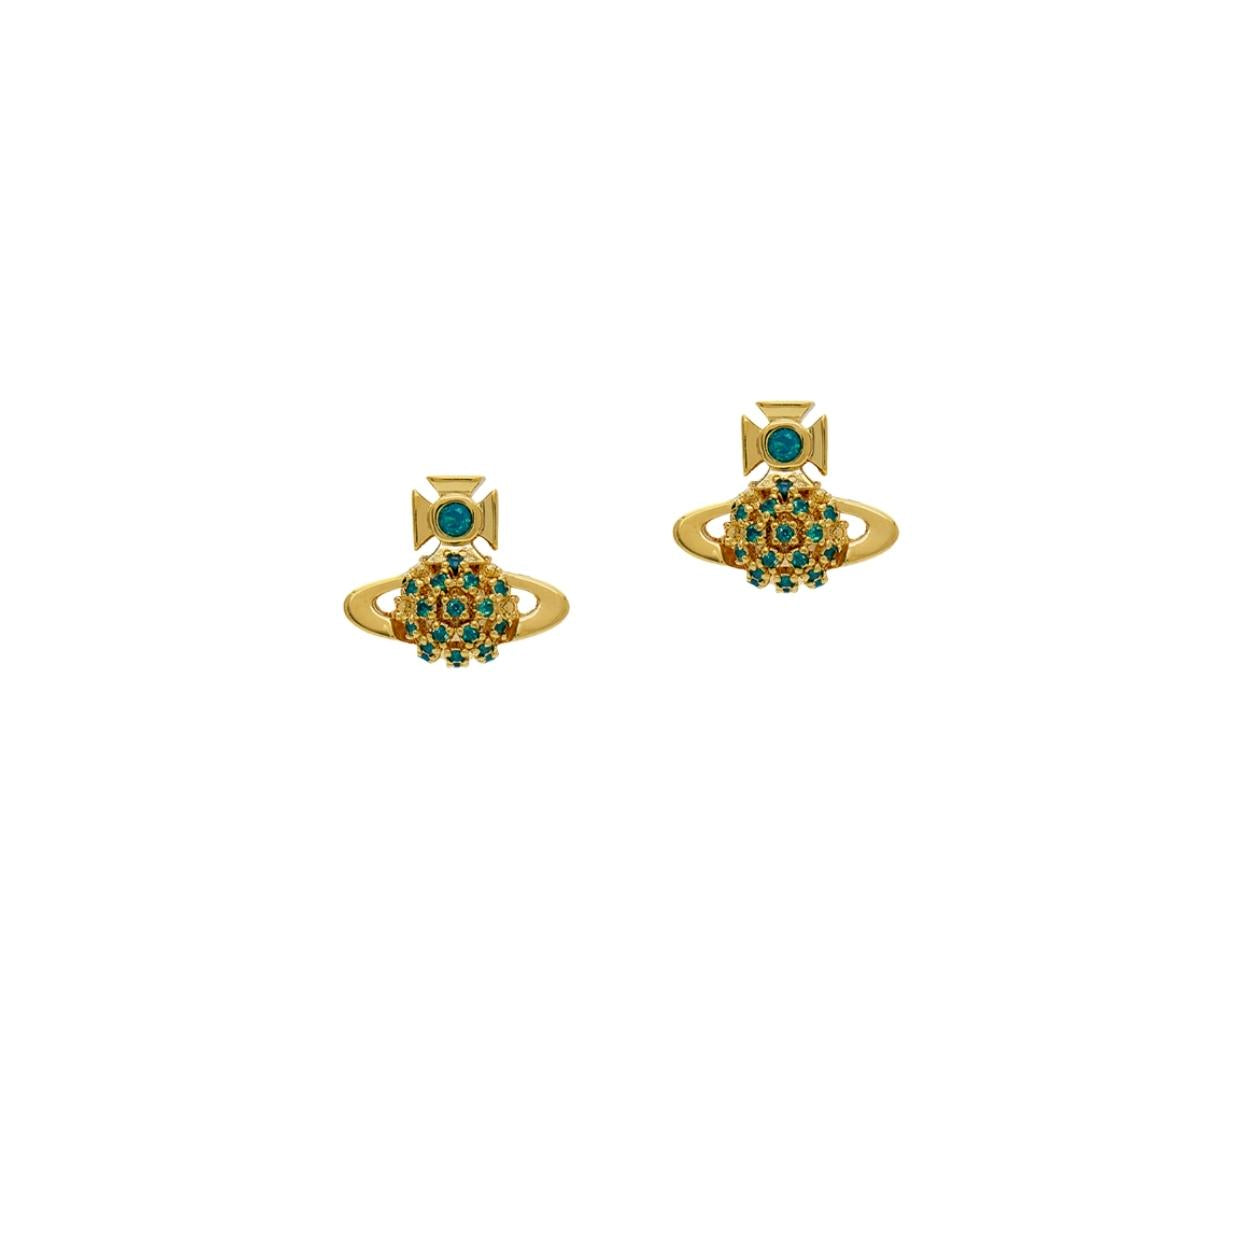 Vivienne Westwood Donna Bas Relief Gold Turquoise Earrings